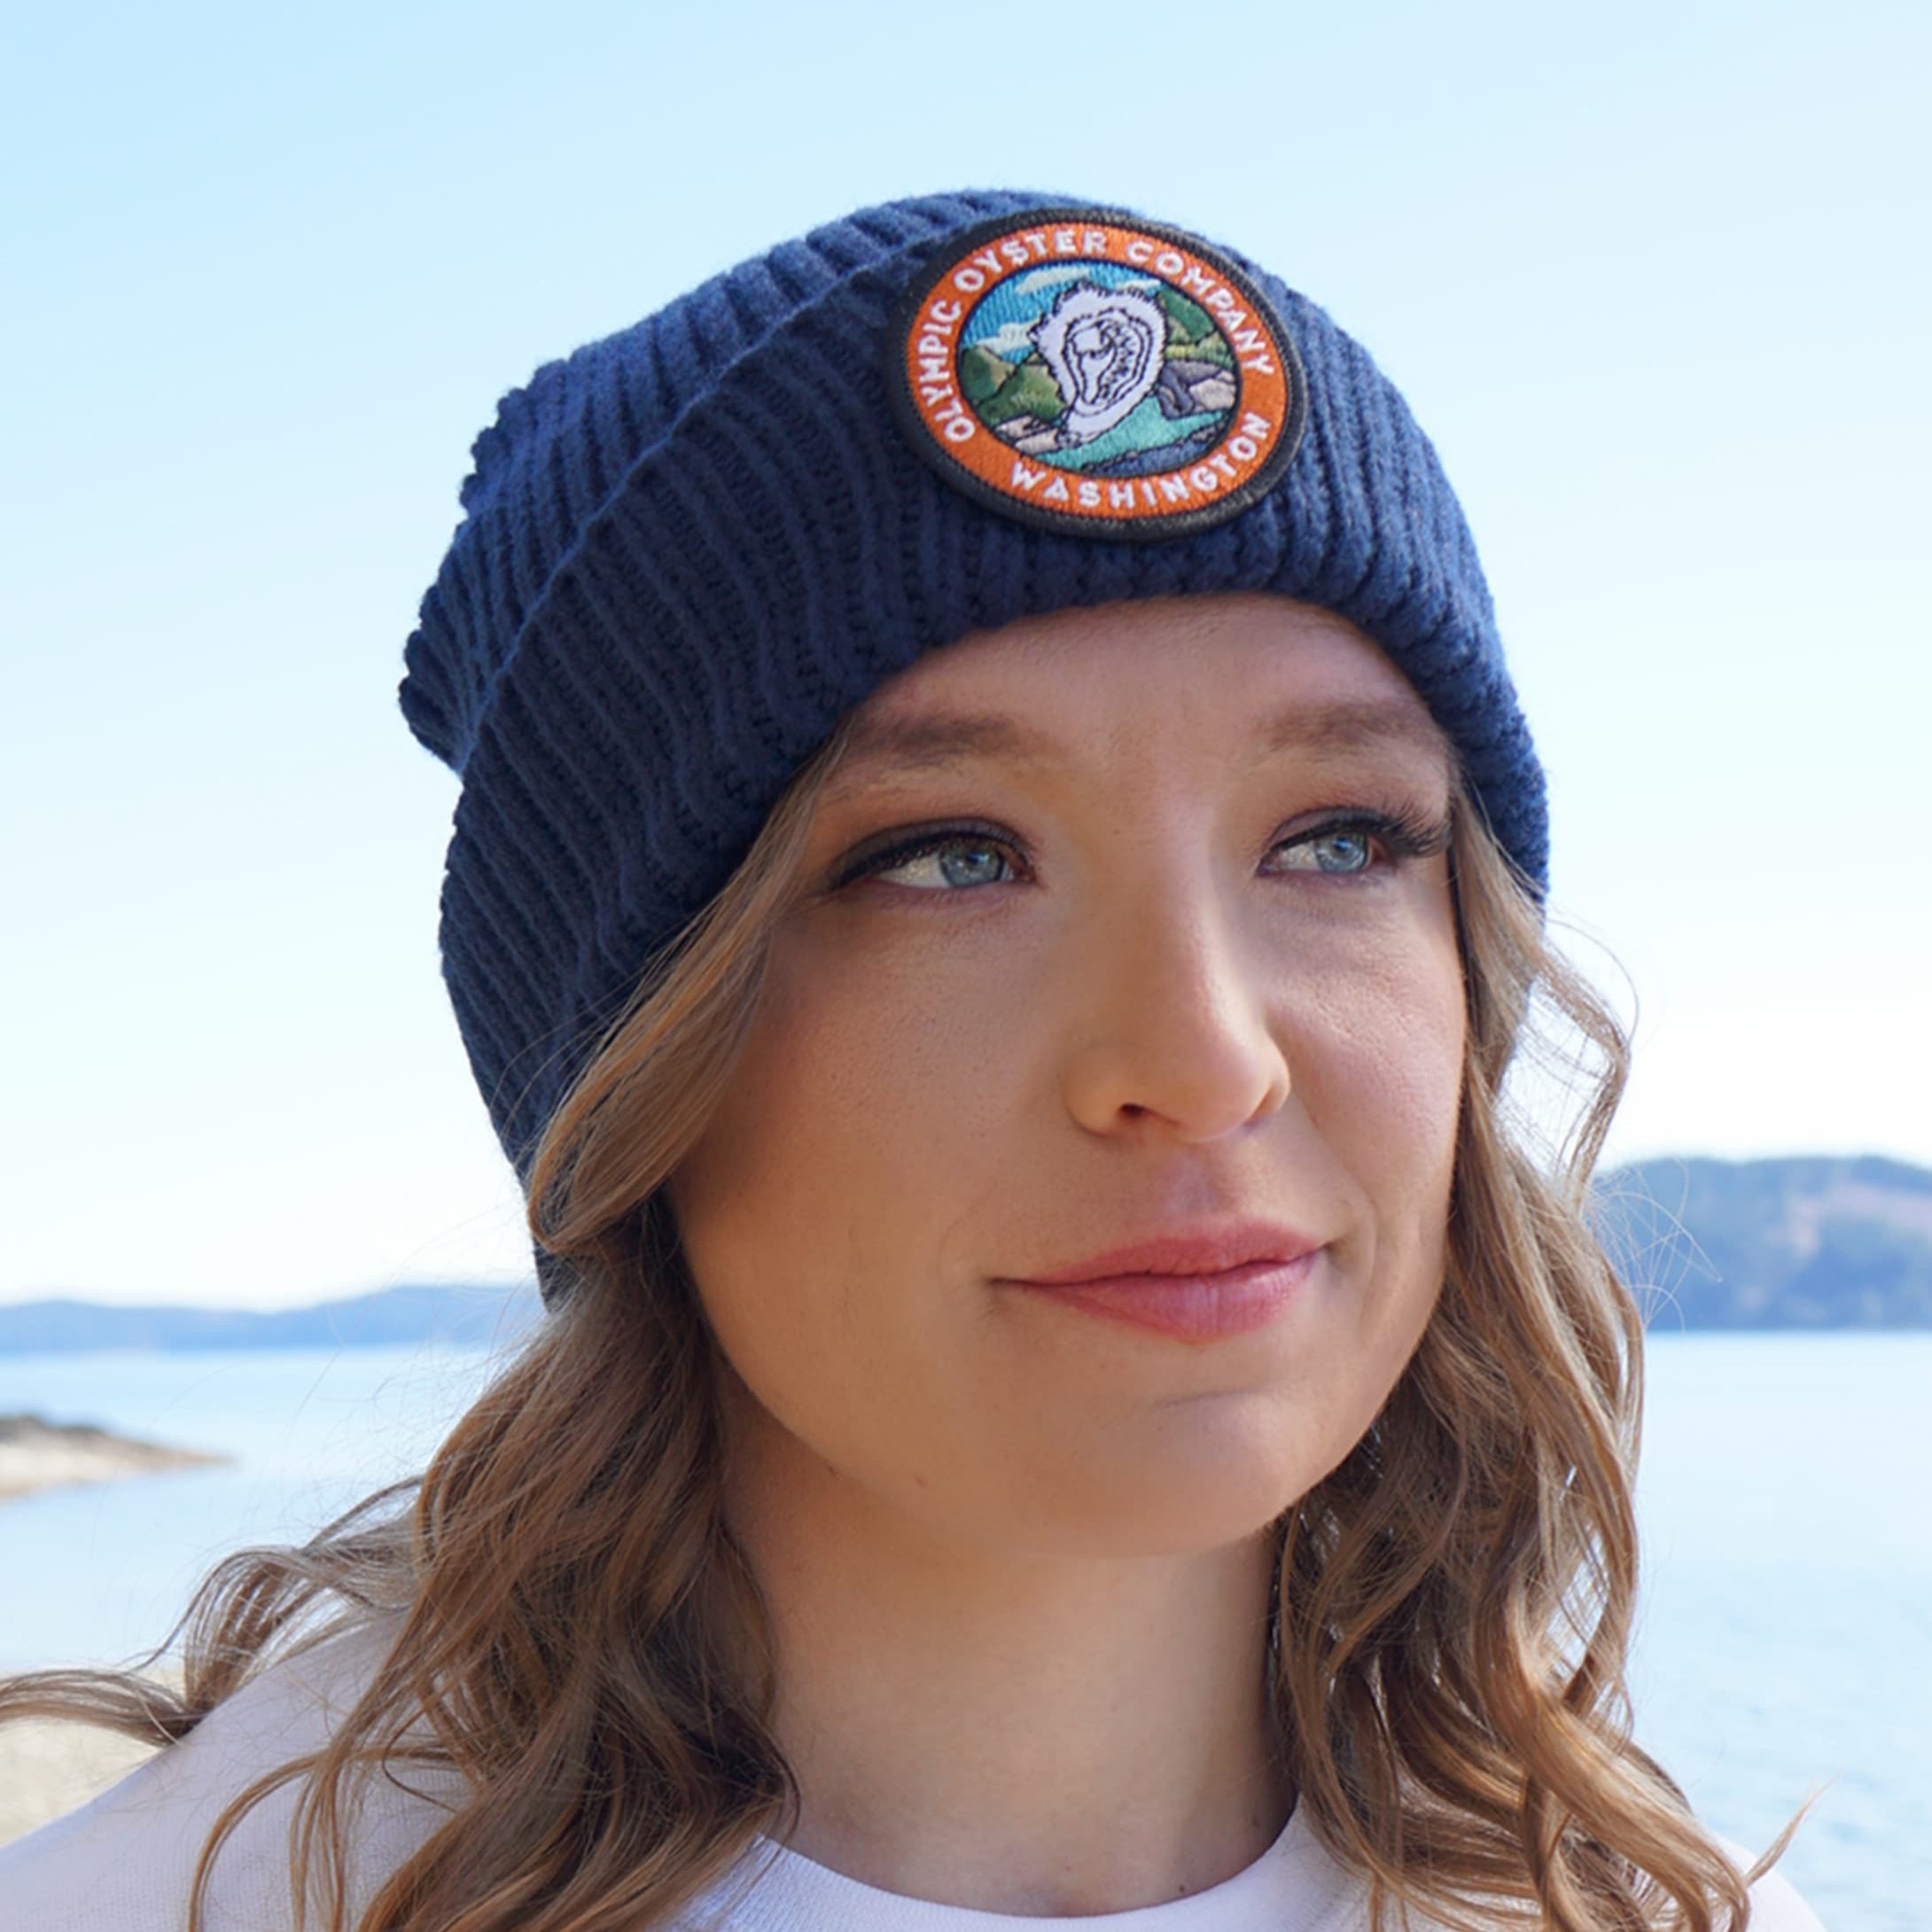 Olympic Oyster Co. Cuffed Knit Beanie